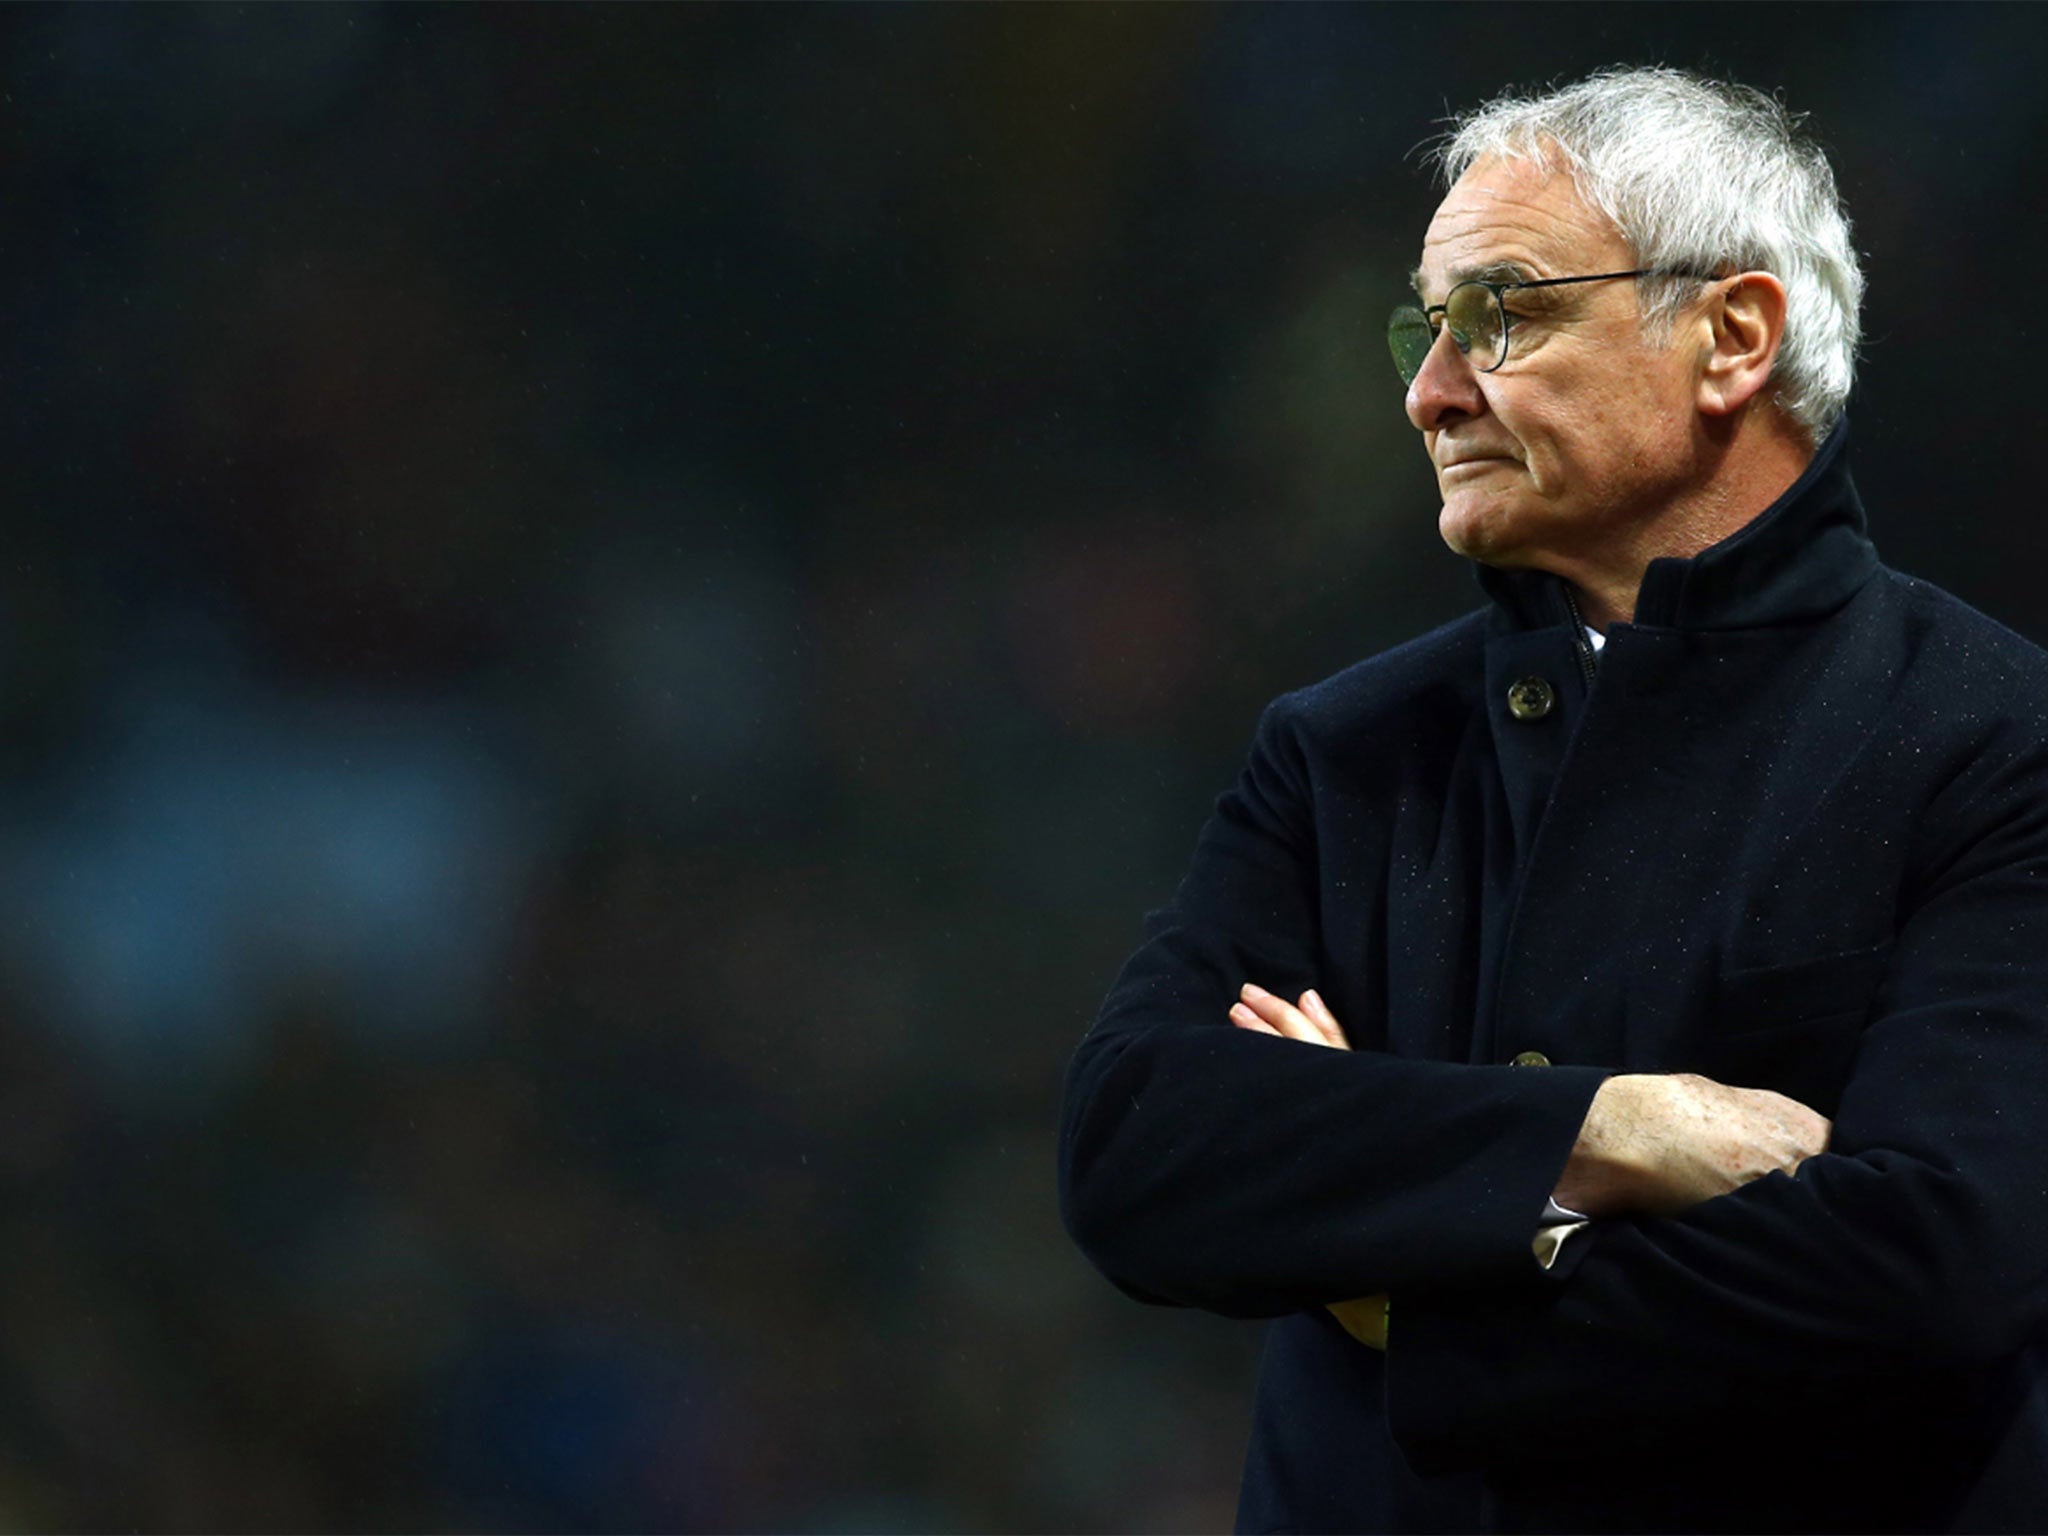 Claudio Ranieri has lead Leicester to the top of the Premier League